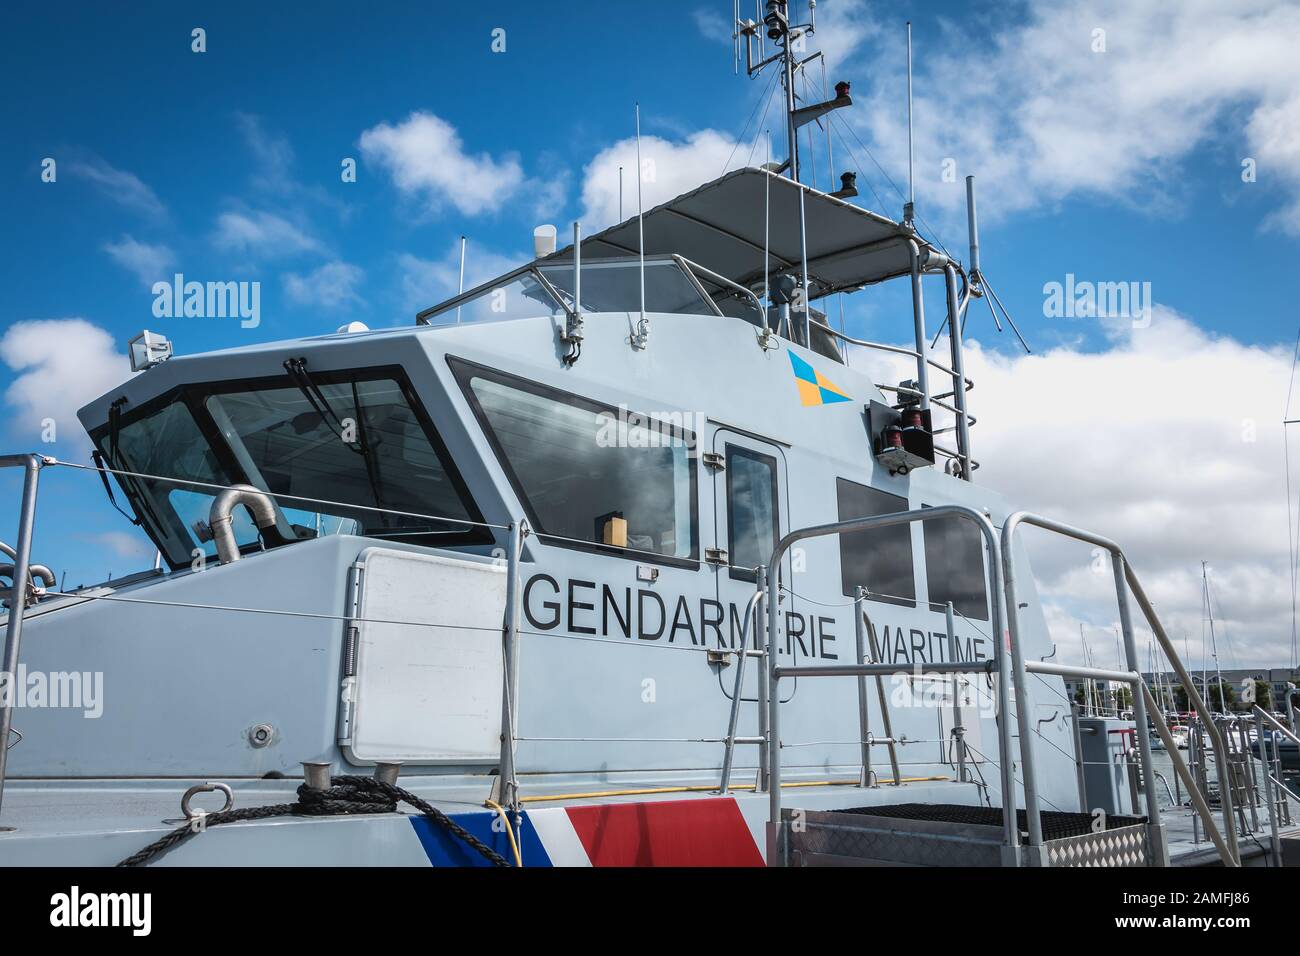 les Sables d Olonne, France - July 24, 2016: detail of the wheelhouse of a star of the French Gendarmerie Maritime (maritime police) on a summer day Stock Photo